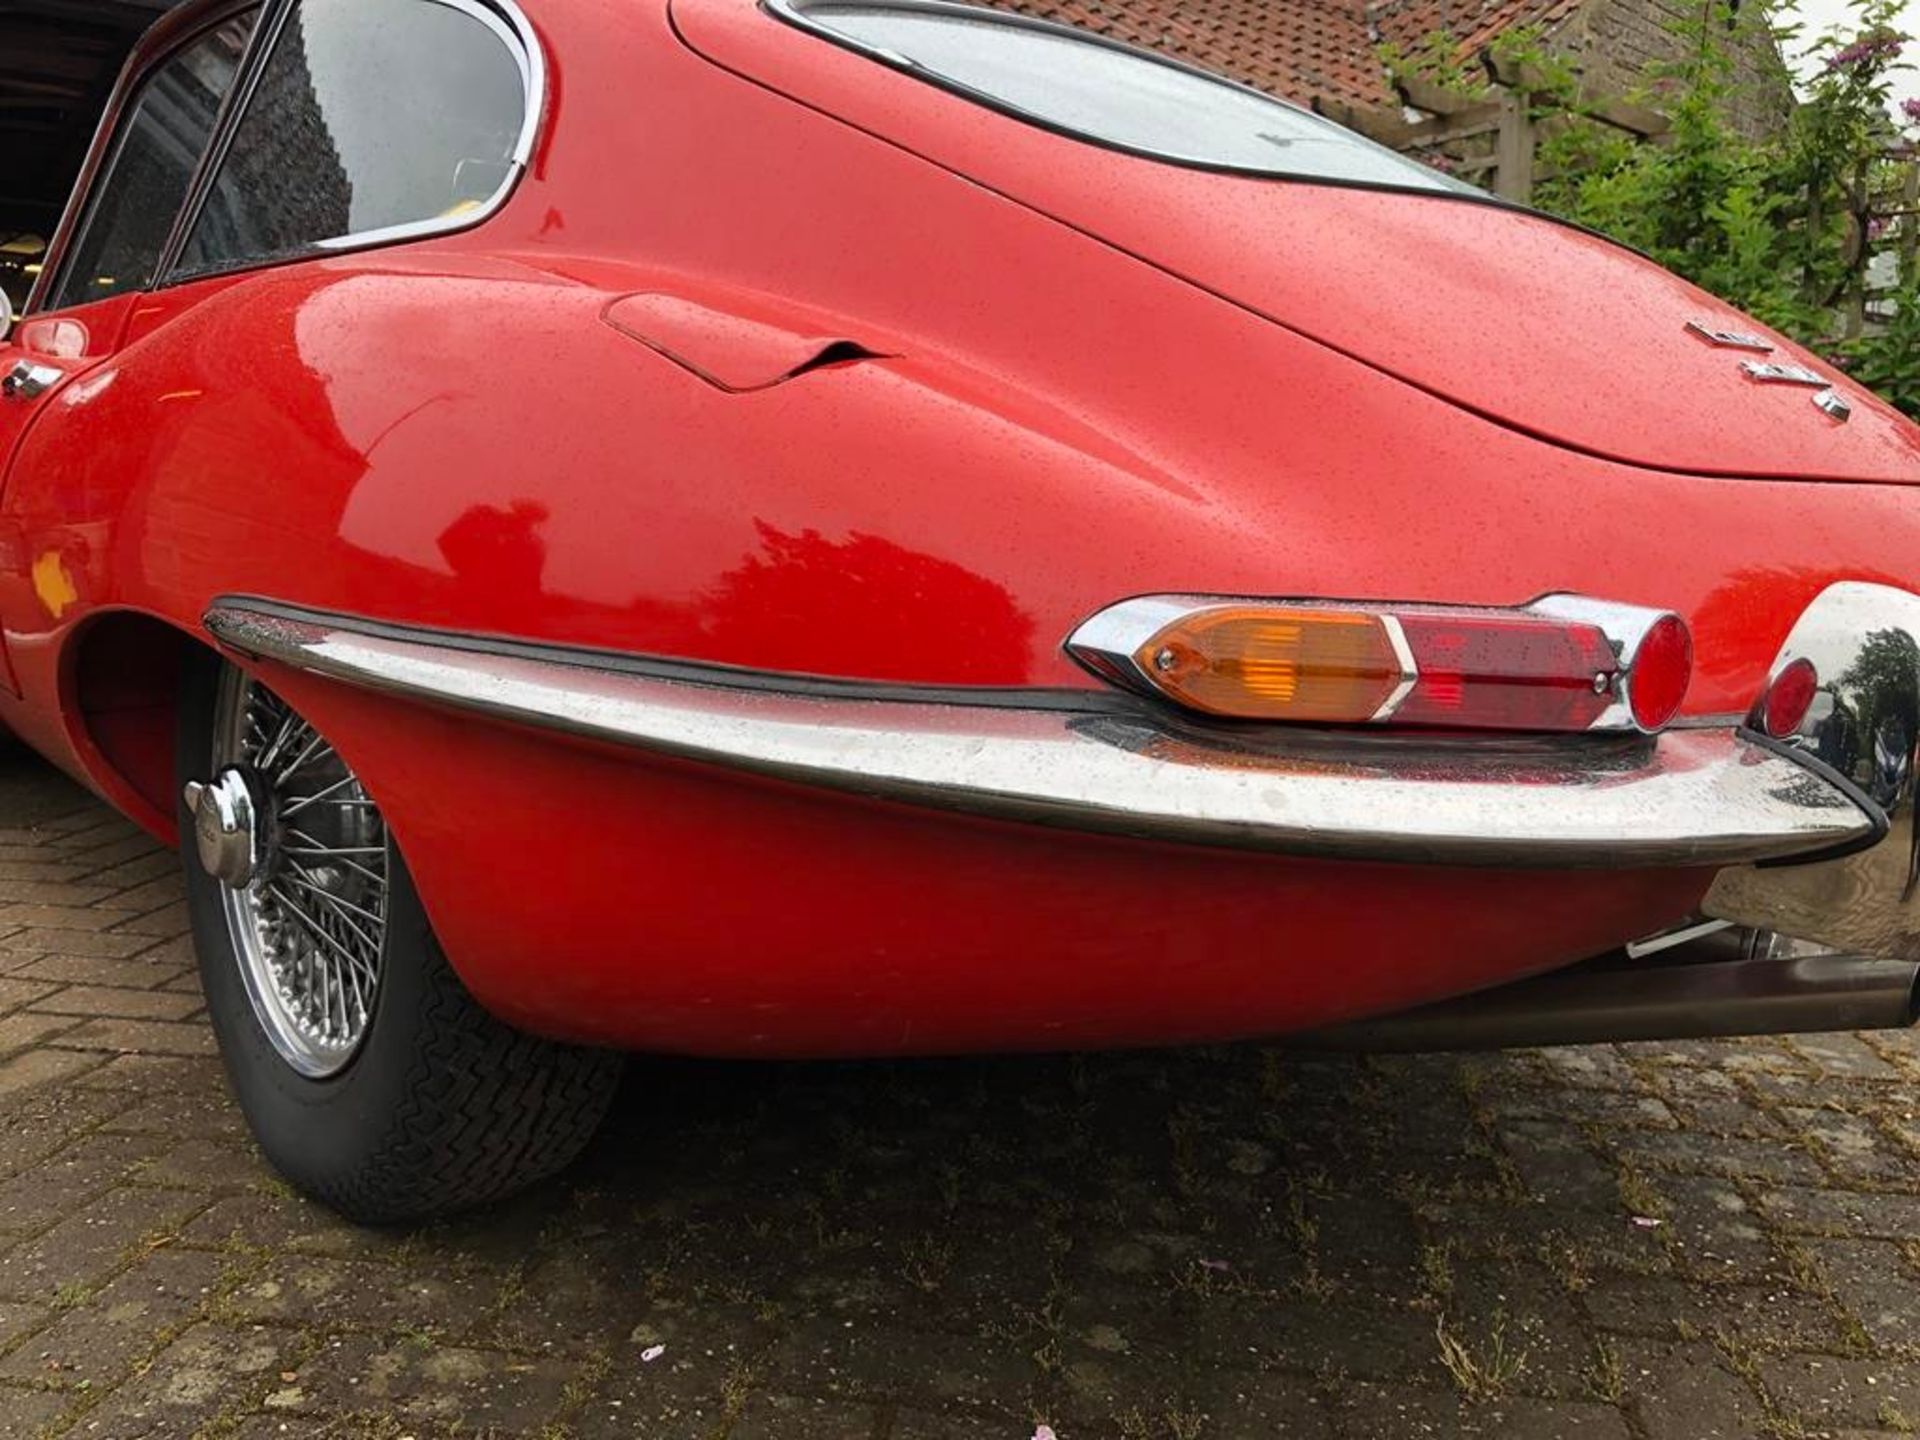 1962 Jaguar E-Type 3.8 Fixed Head Coupé Registration number 297 HBF Chassis number 860773 Engine - Image 54 of 160